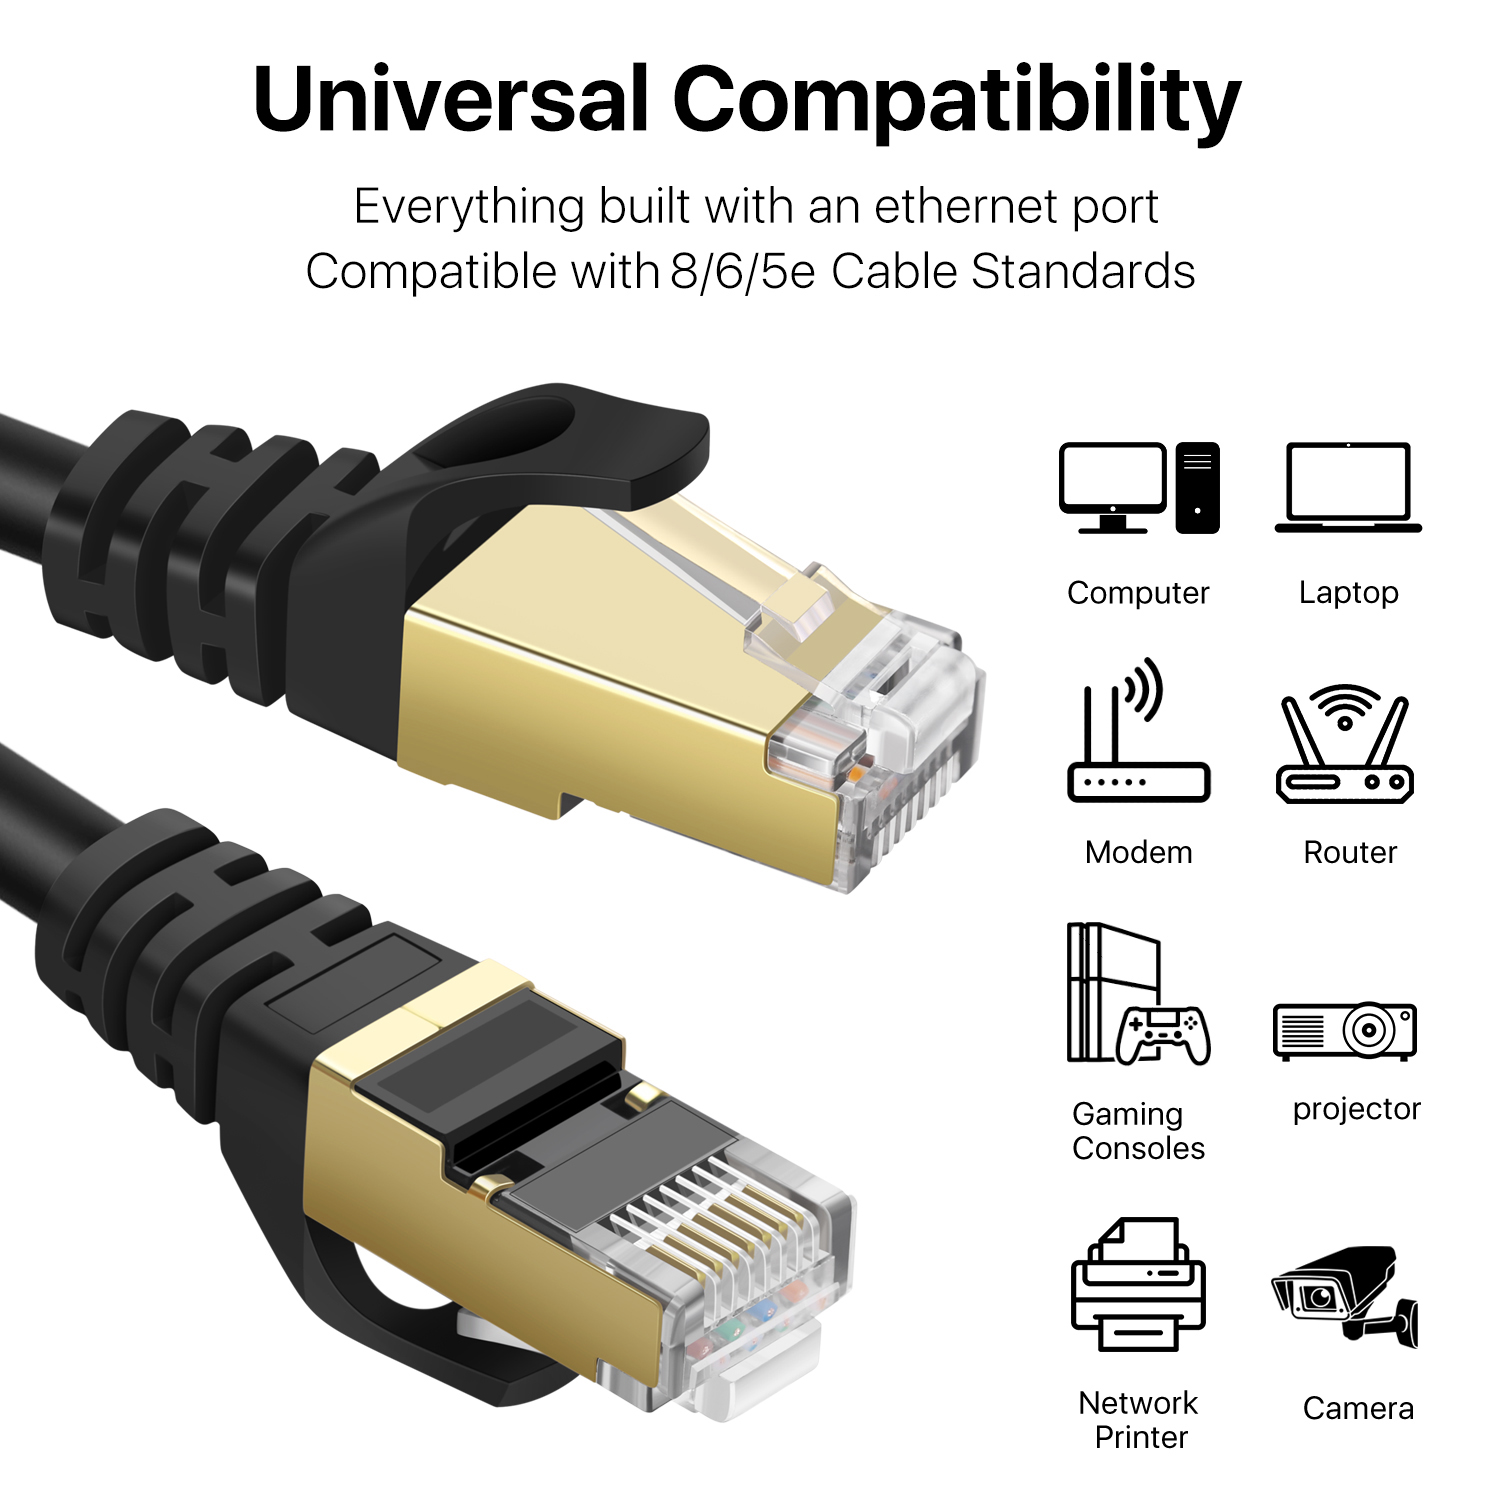 Reliable Speed & Connectivity Shielded Twisted Pair STP CAT 7 Cable- This cable provides exceptional transmission performance and low signal losses. Blocking out external EMI/RFI interference for high quality, maximum reliability, error-free signal transfer